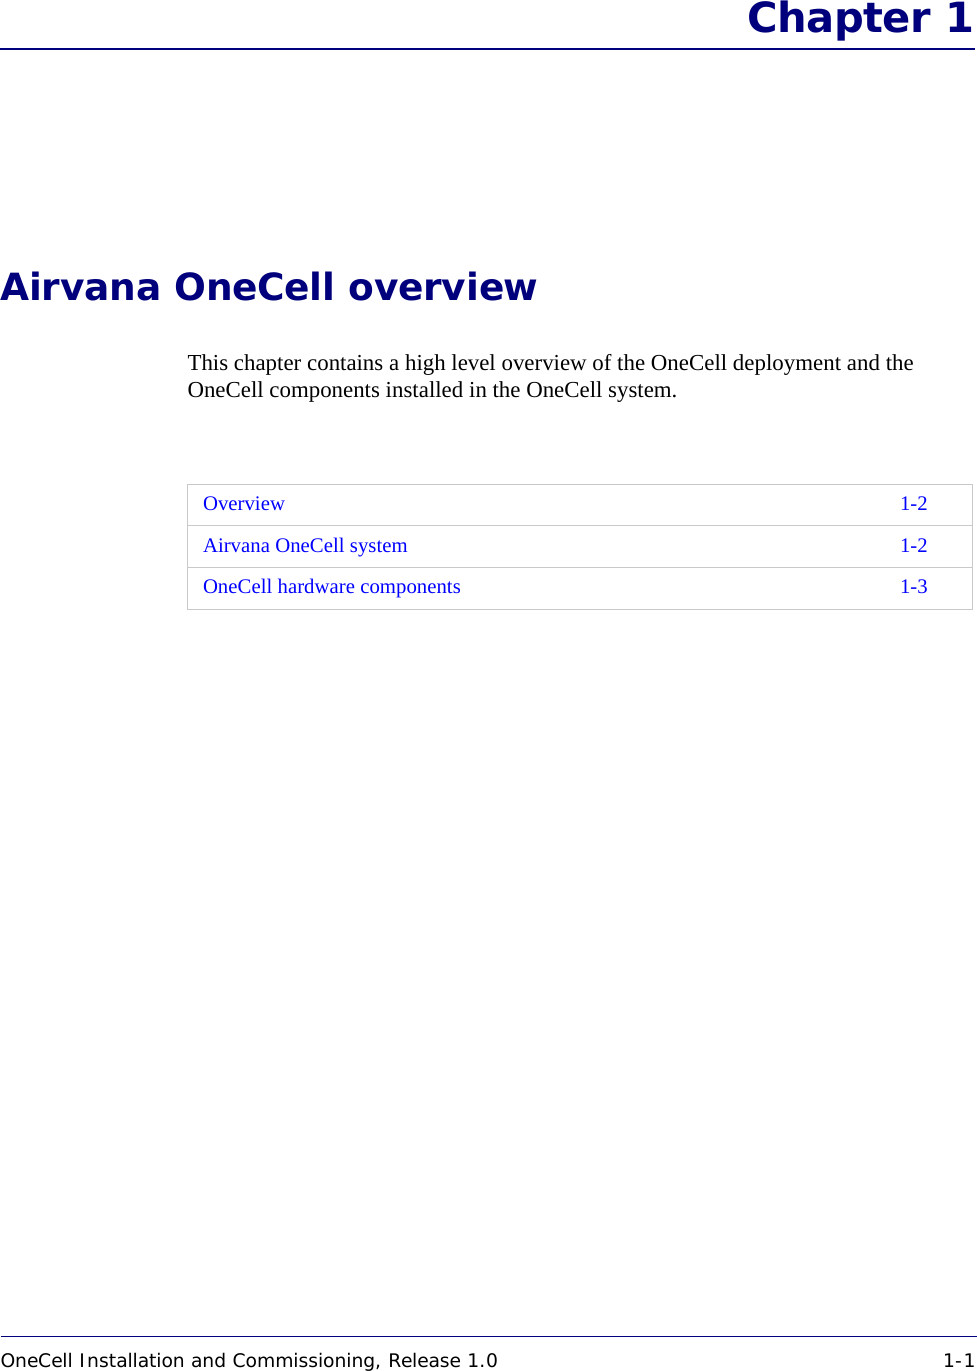 OneCell Installation and Commissioning, Release 1.0 1-1DRAFT Chapter 1Airvana OneCell overviewThis chapter contains a high level overview of the OneCell deployment and the OneCell components installed in the OneCell system. Overview 1-2Airvana OneCell system 1-2OneCell hardware components 1-3